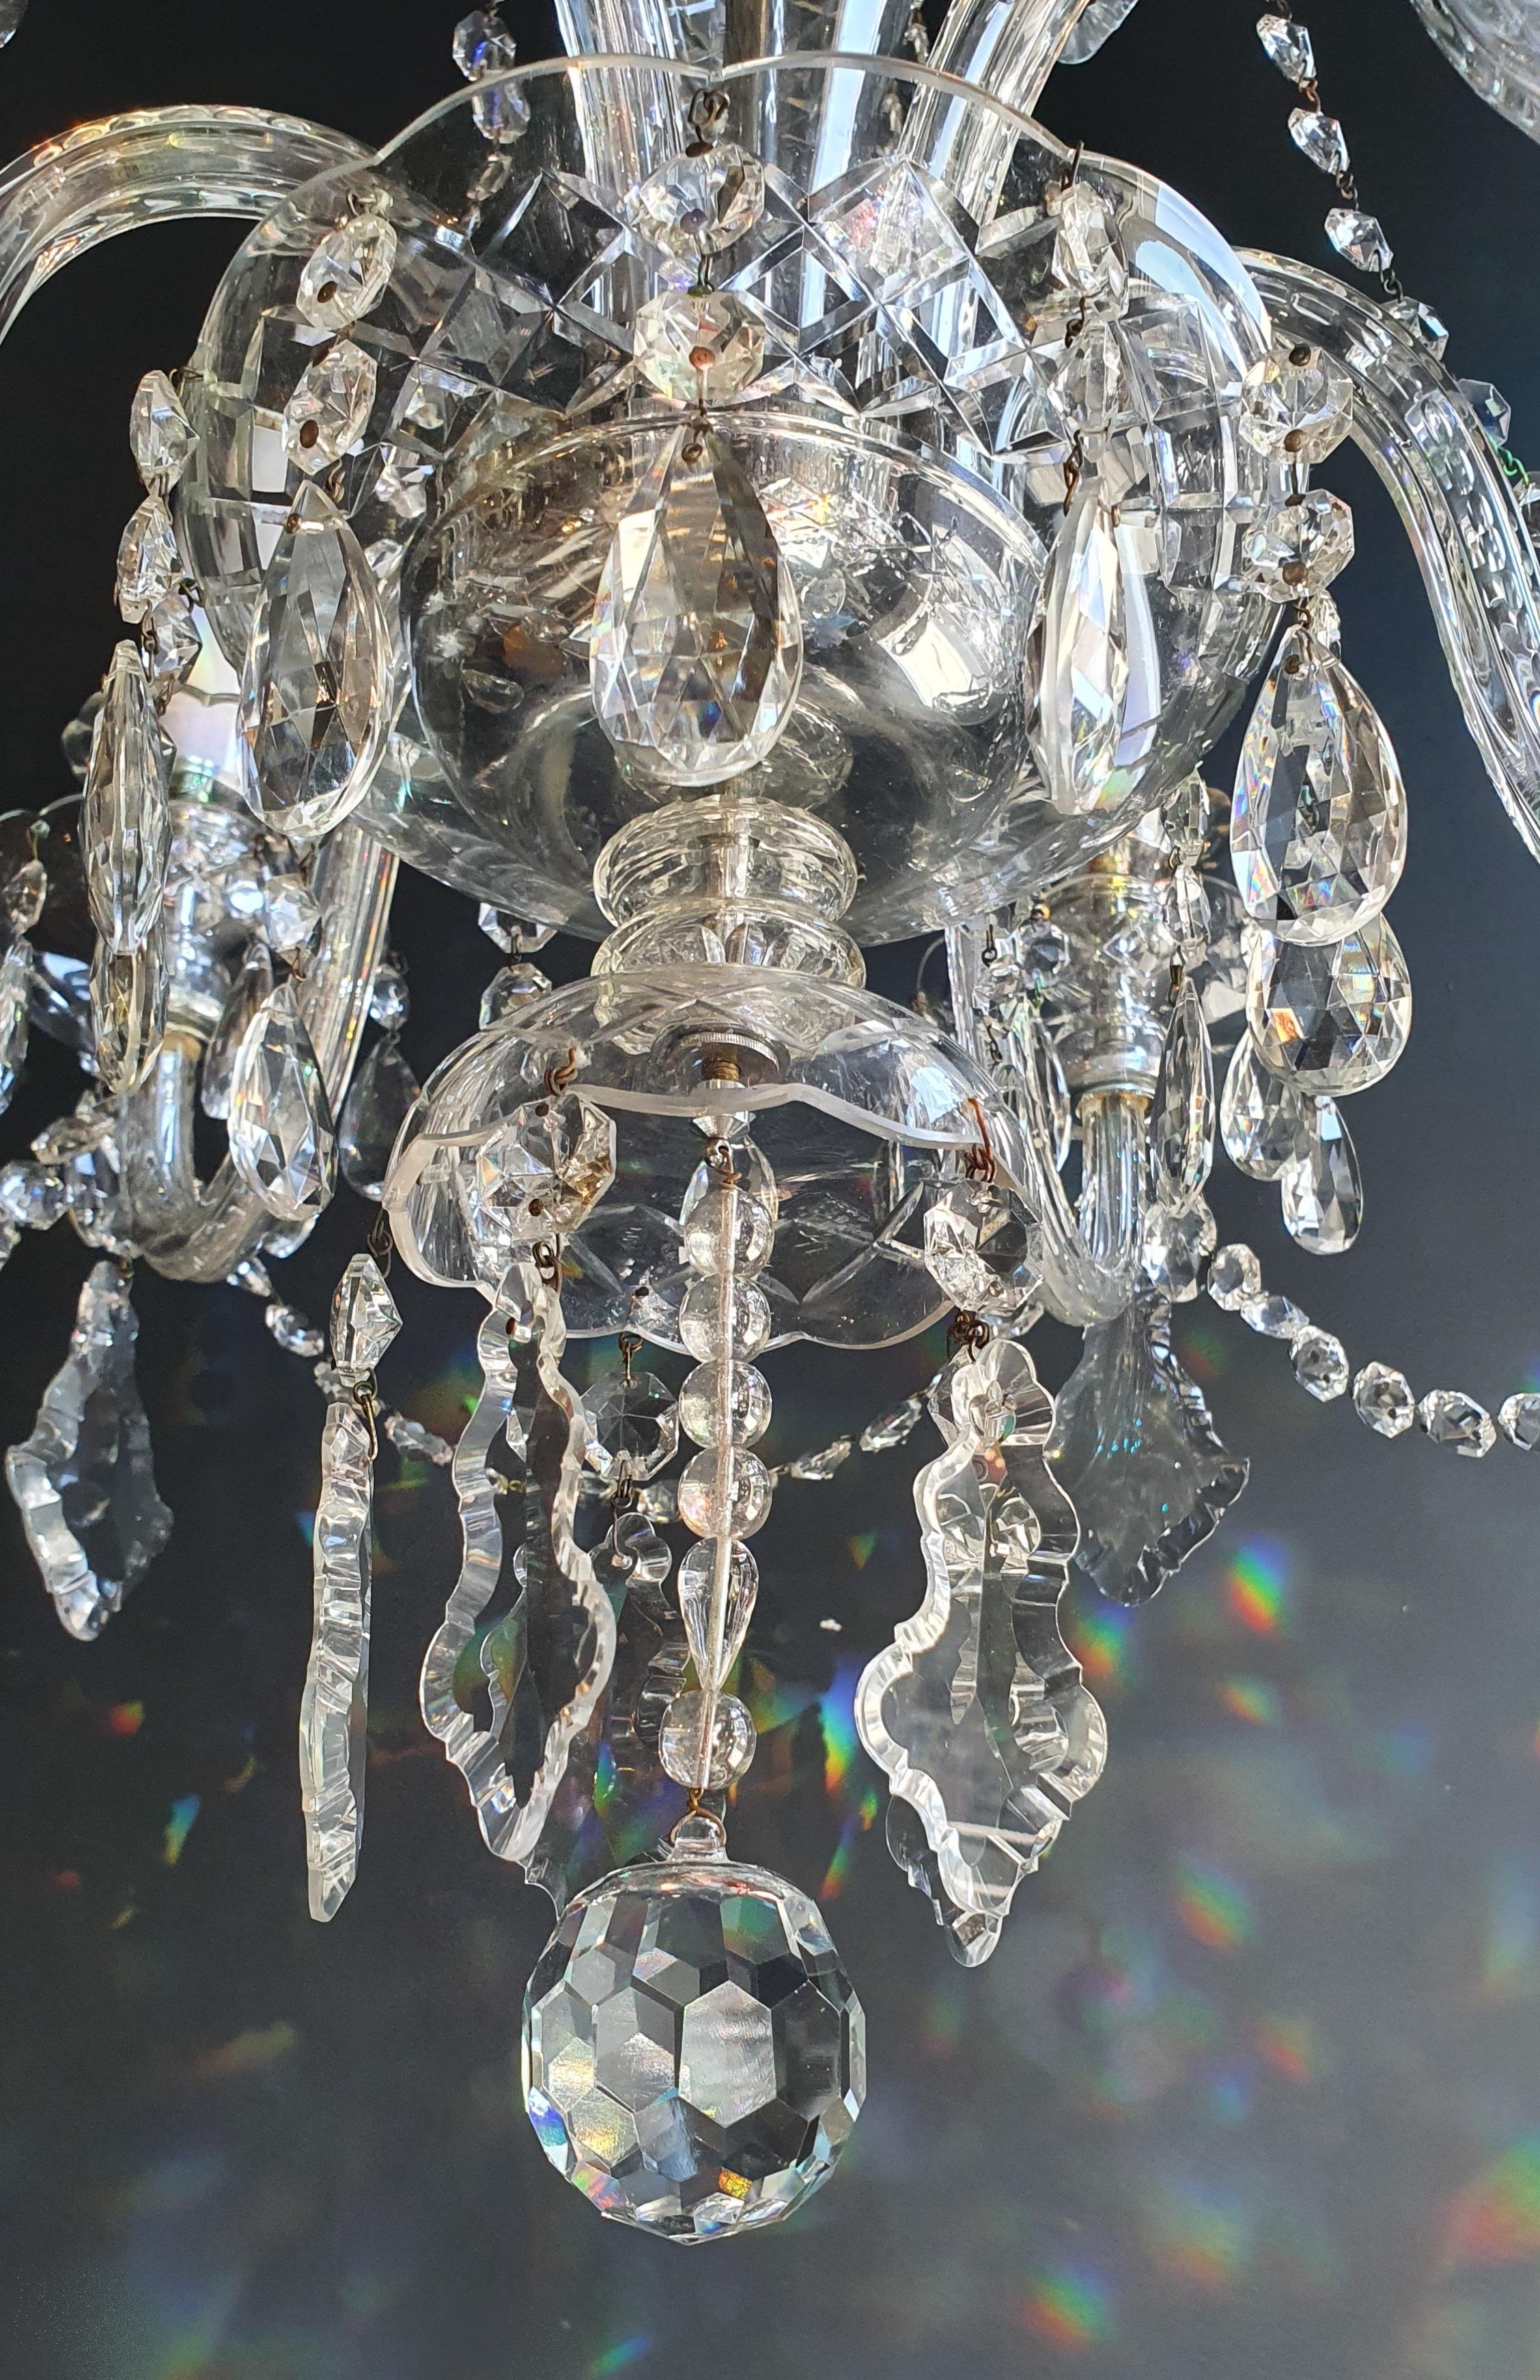 Introducing a stunning Crystal Bohemian Glass Candelabrum Brass Bronze Antique Chandelier in the Luis Art style. This old chandelier has been meticulously restored with love and expertise in Berlin, and its electrical wiring is fully compatible with